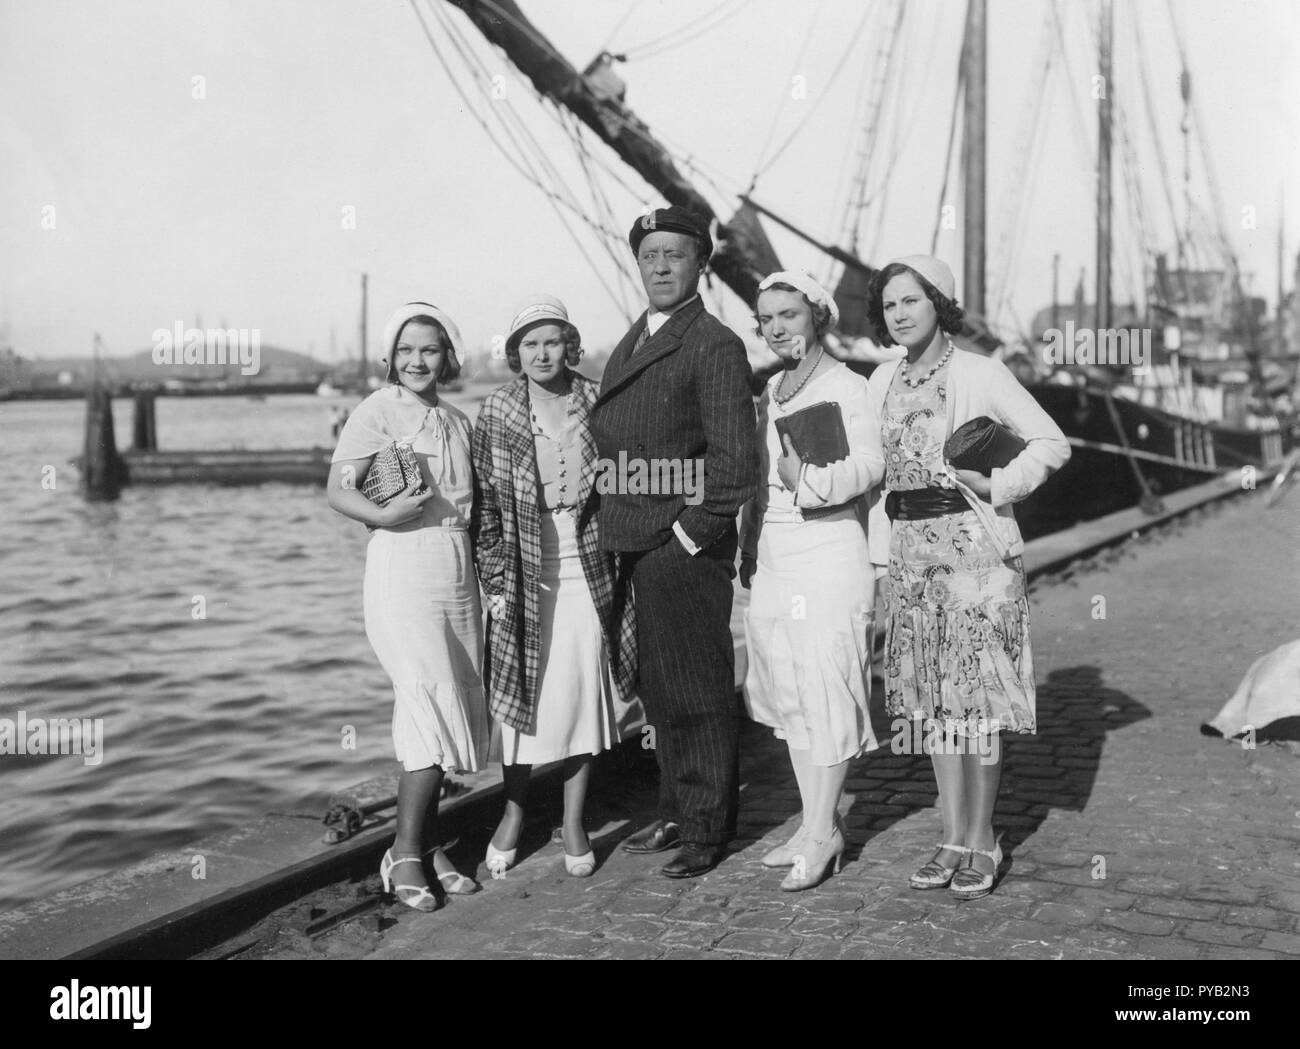 Filming in the 1930s. Swedish actor Fridolf Rhudin. 1895-1935. Pictured here together with four fashionably dressed ladies during the filming of Skepp Ohoj from 1931. Stock Photo